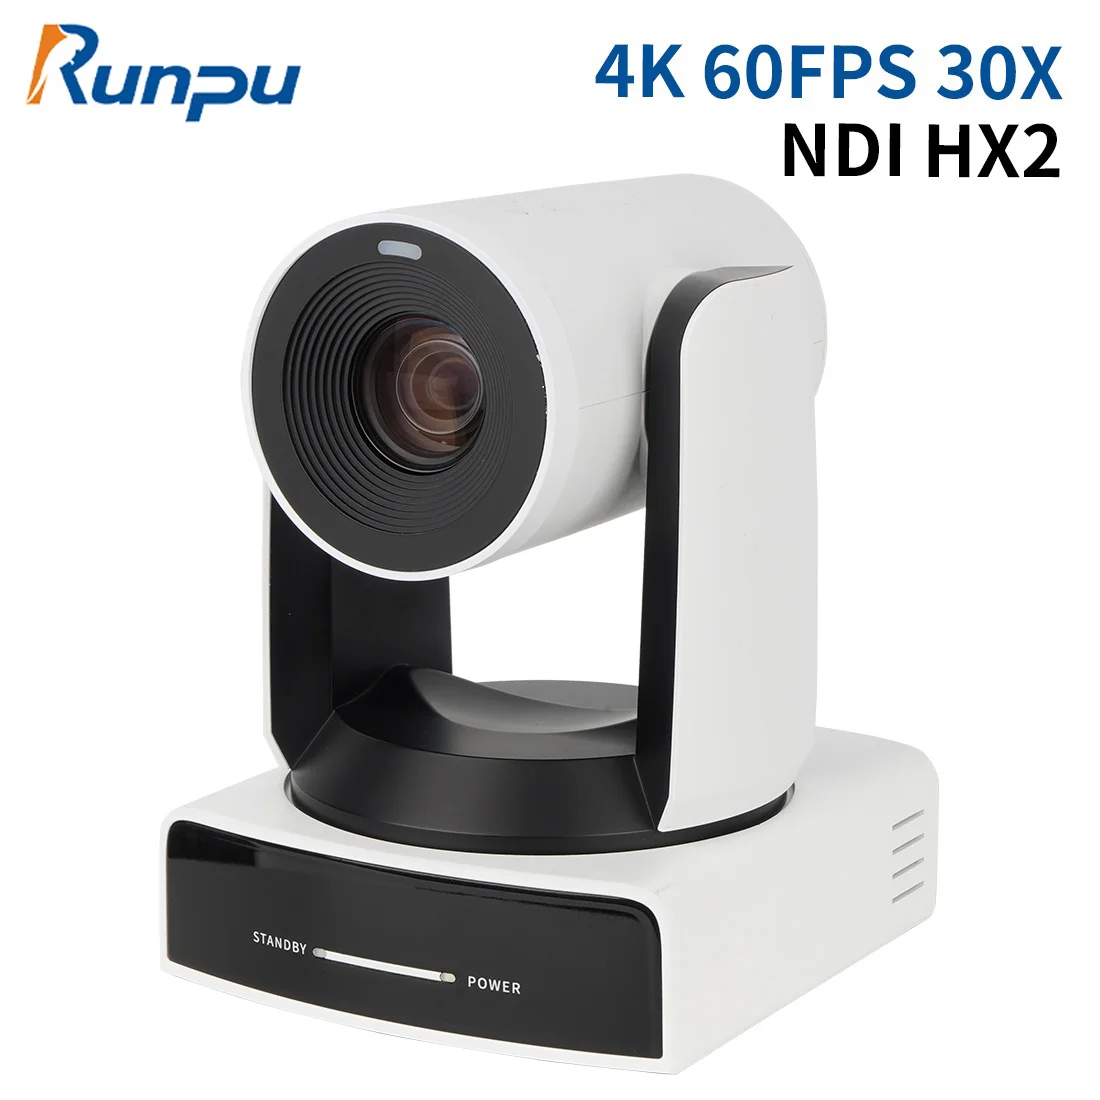 4K NDI Camera 60FPS 30X Optical Zoom AI Auto Tracking PTZ Camera with PoE HDMI SDI USB Tally Lamp for Live Streaming,Youtube OBS 2mp 60fps color global shutter usb camera high speed moving capture 2 megapixel webcam with cs lens 5 50mm 2 8 12mm